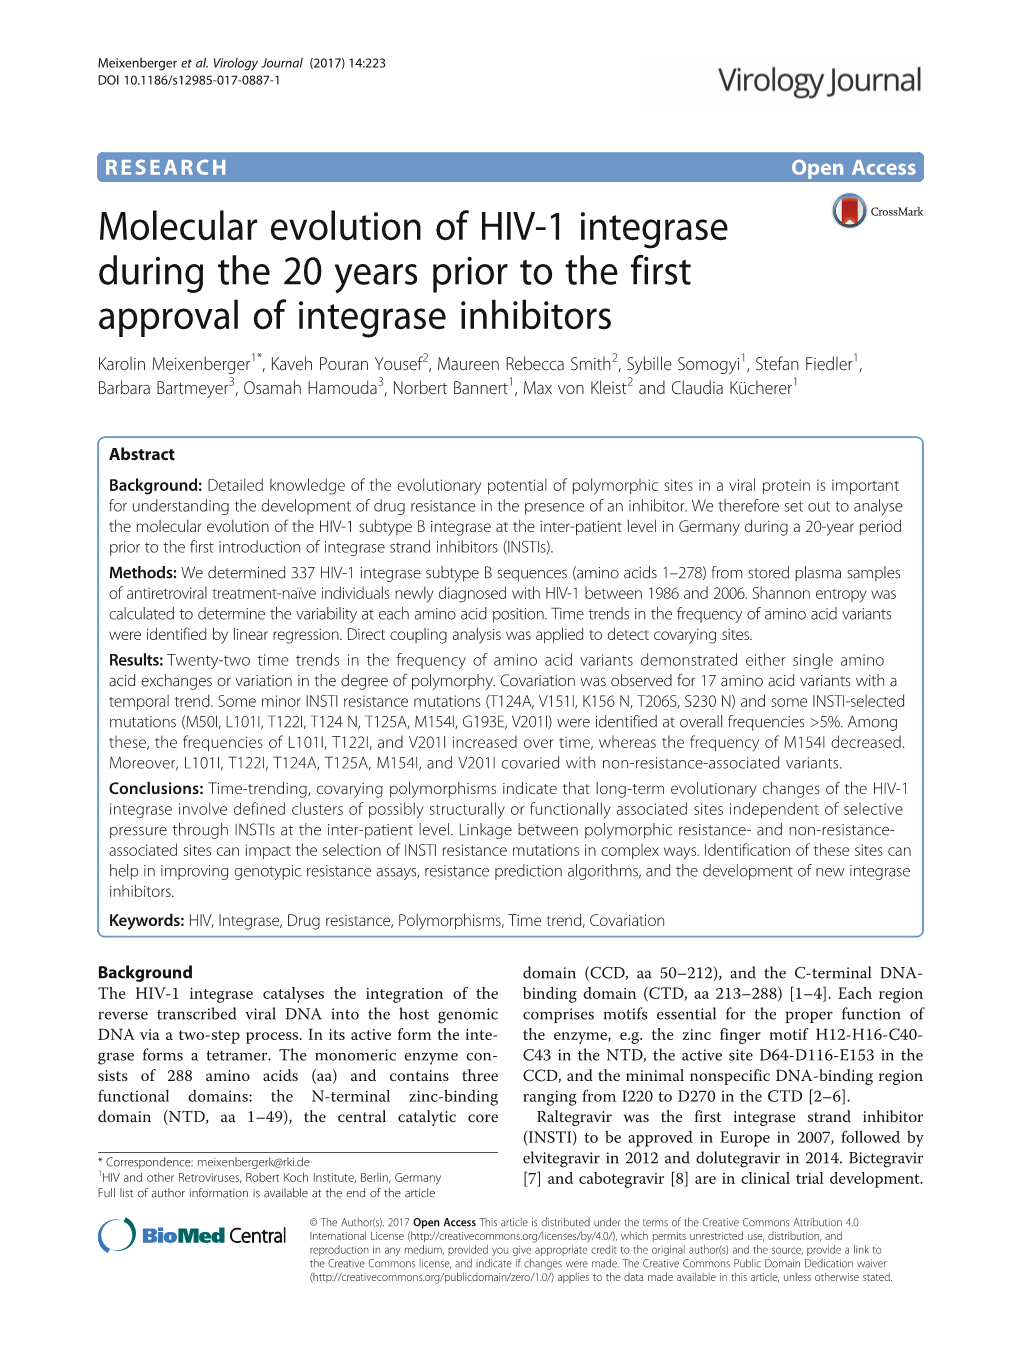 Molecular Evolution of HIV-1 Integrase During the 20 Years Prior to the First Approval of Integrase Inhibitors